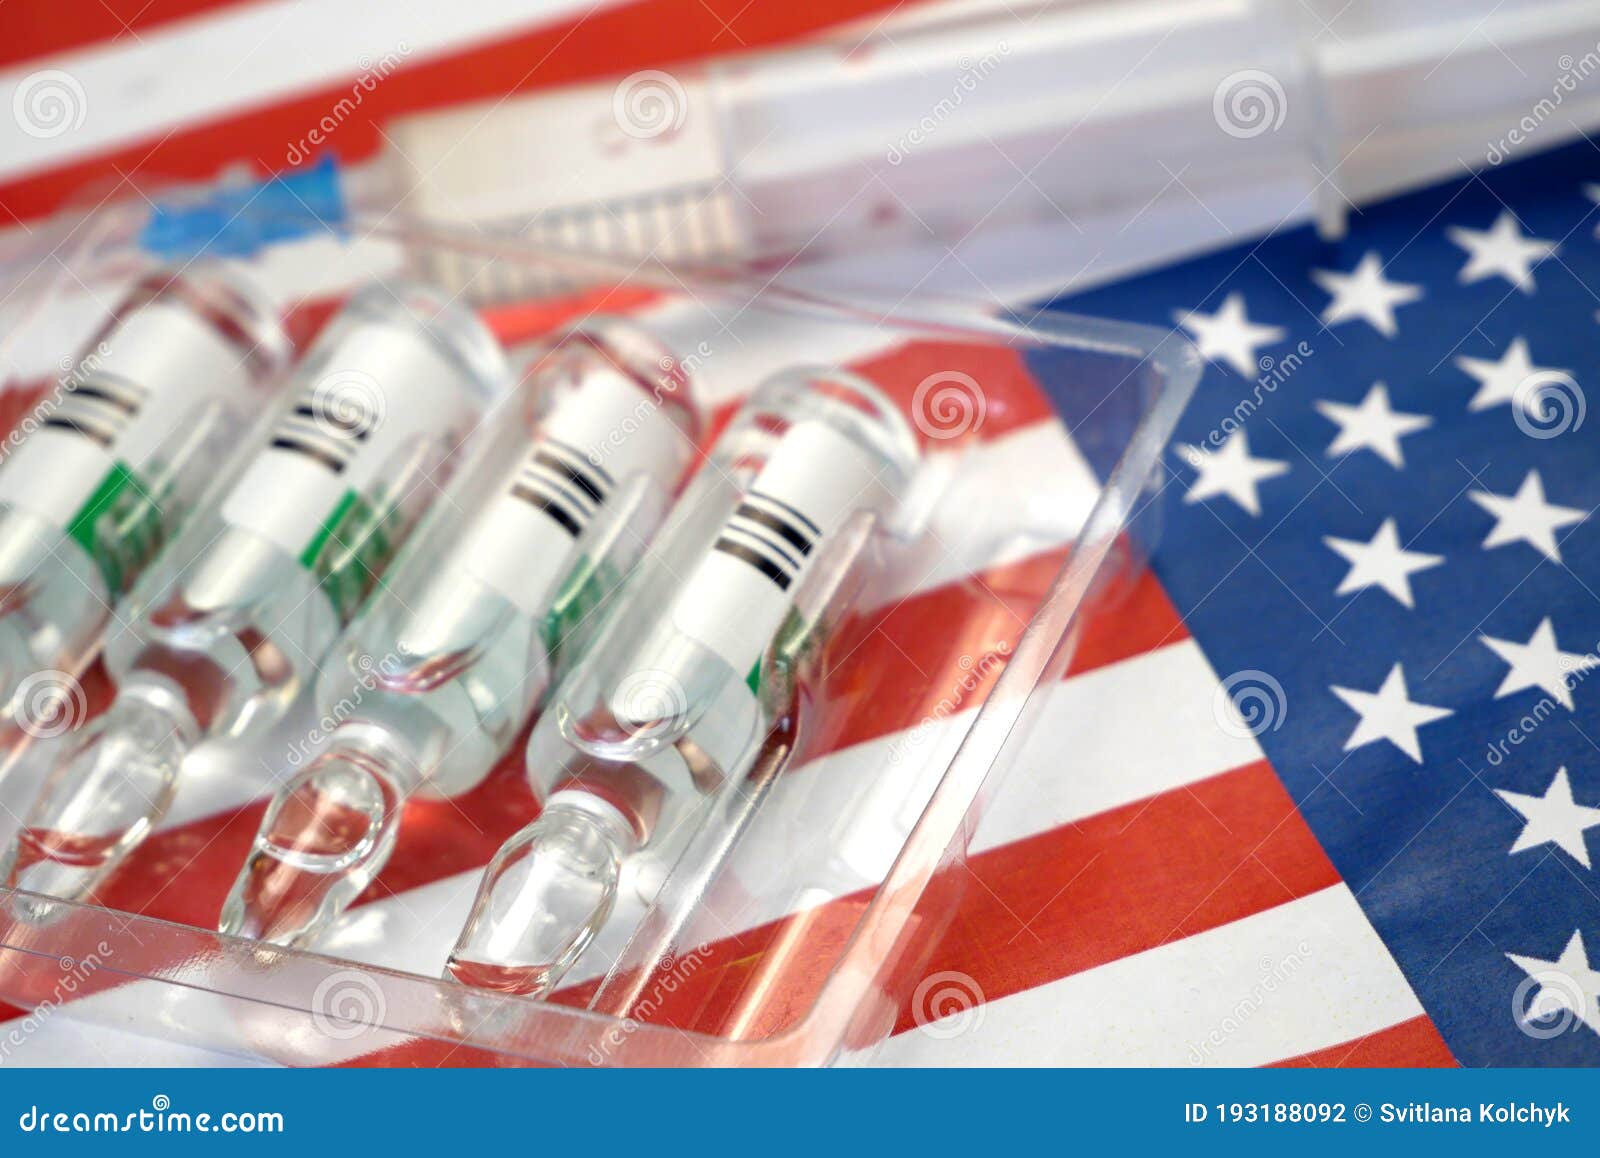 syringe with a vaccine is held by  hand in a glove on background of the usa flag, vaccine against coronavirus, operation warp